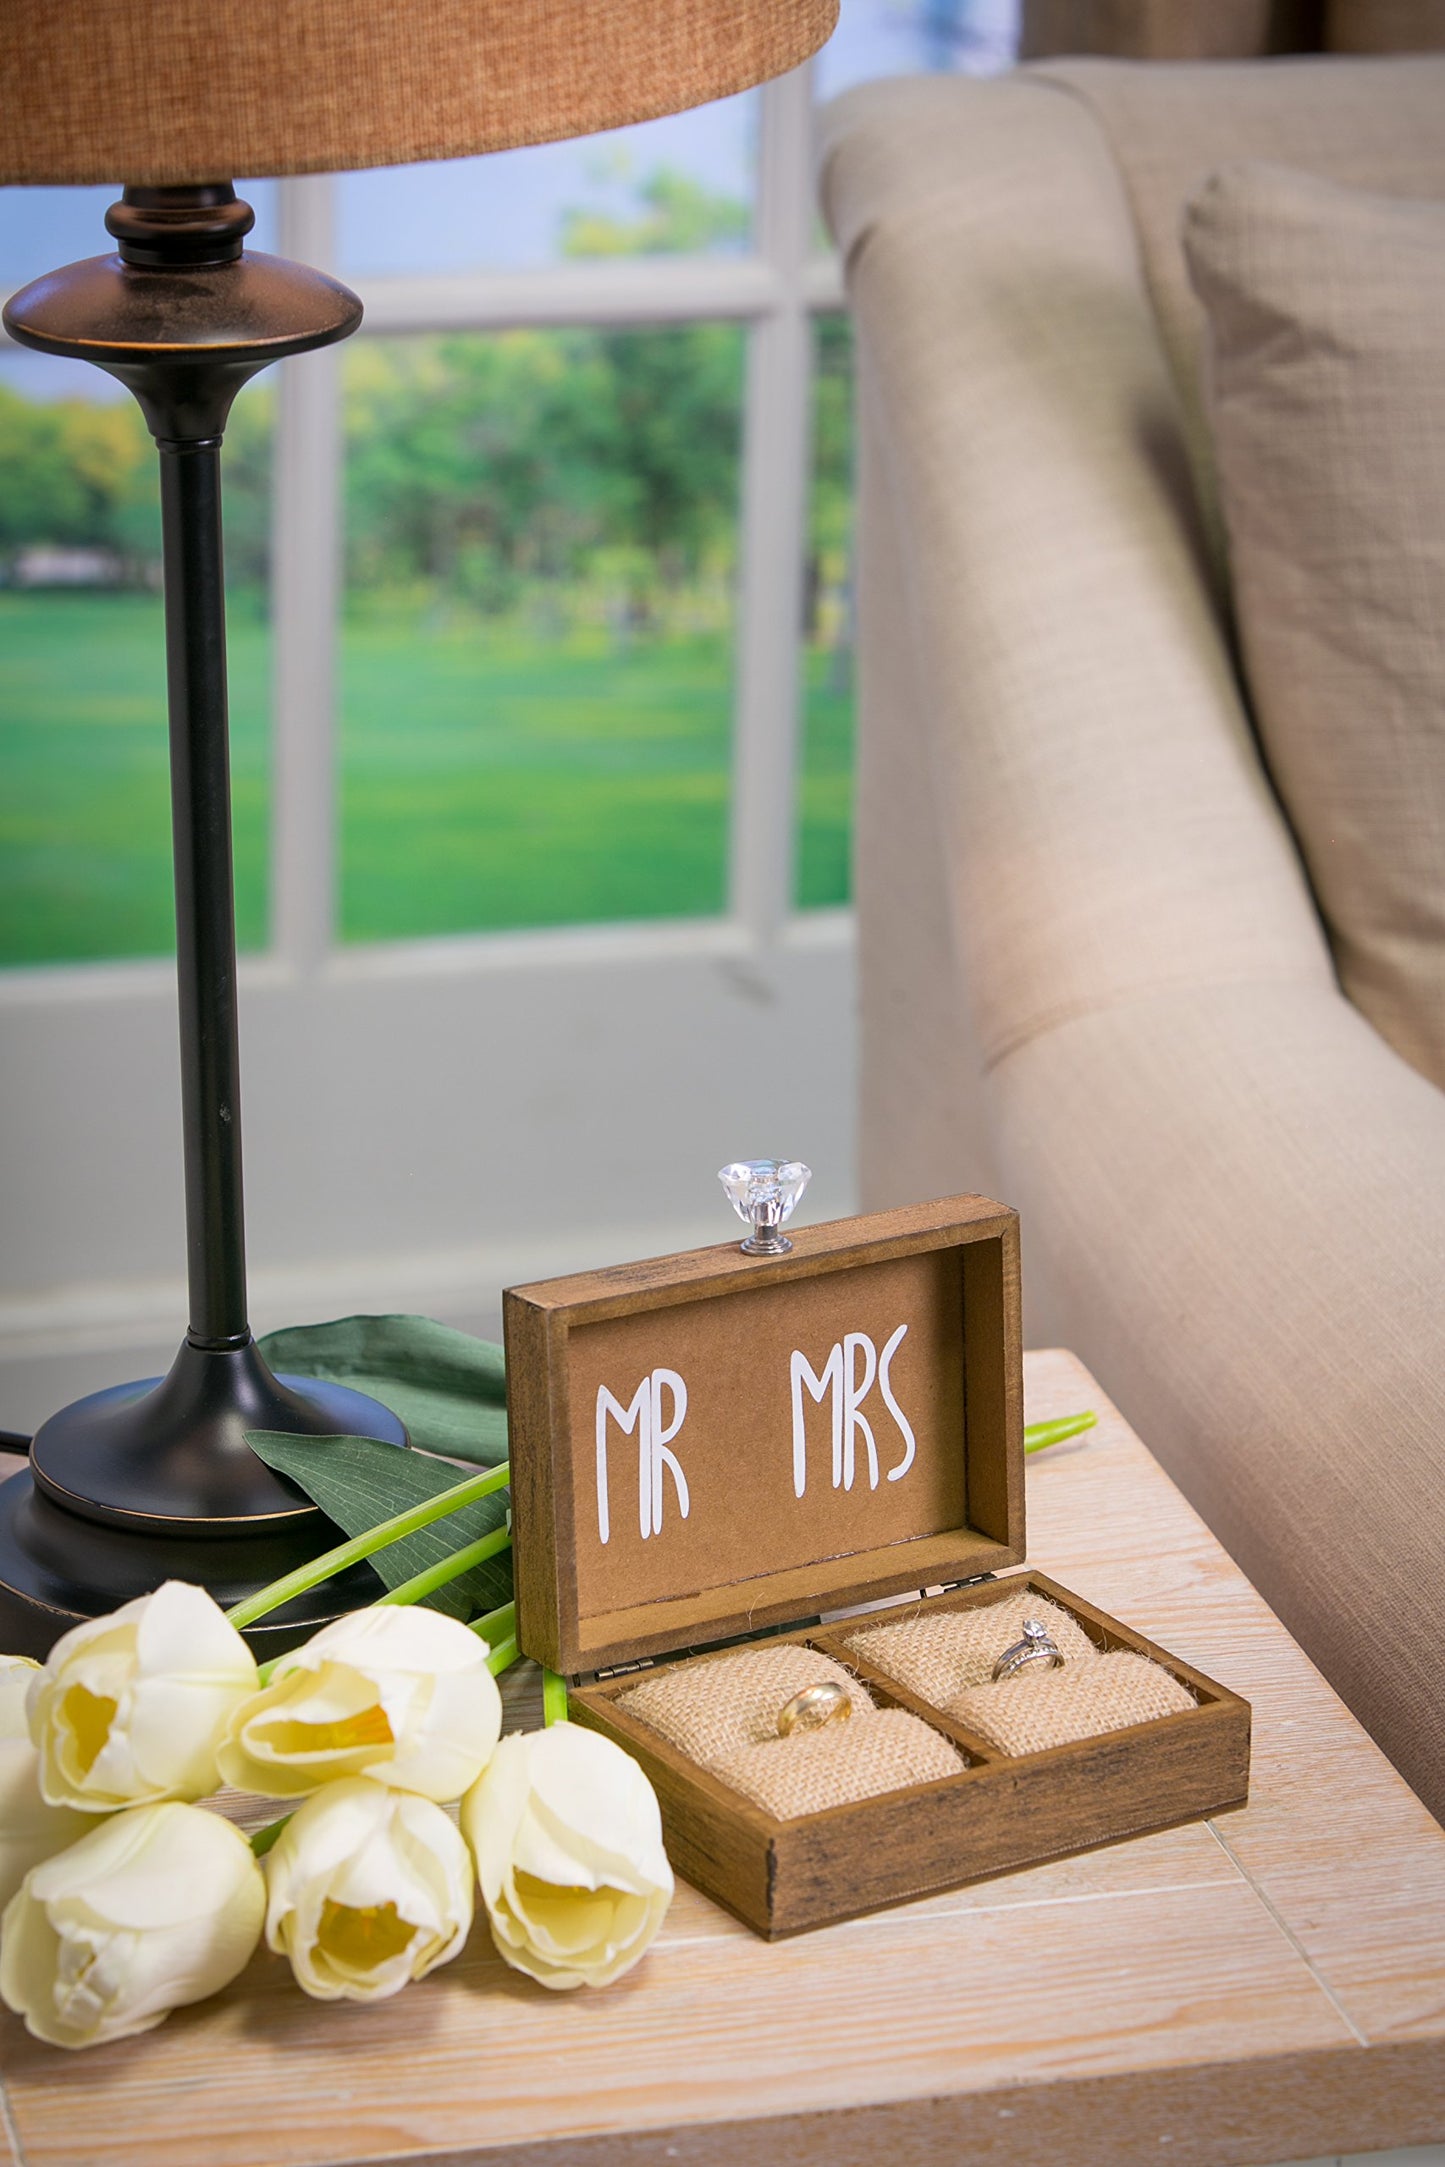 Mr and Mrs Wooden Ring Holder Decorative Box “and Then Two Become One”